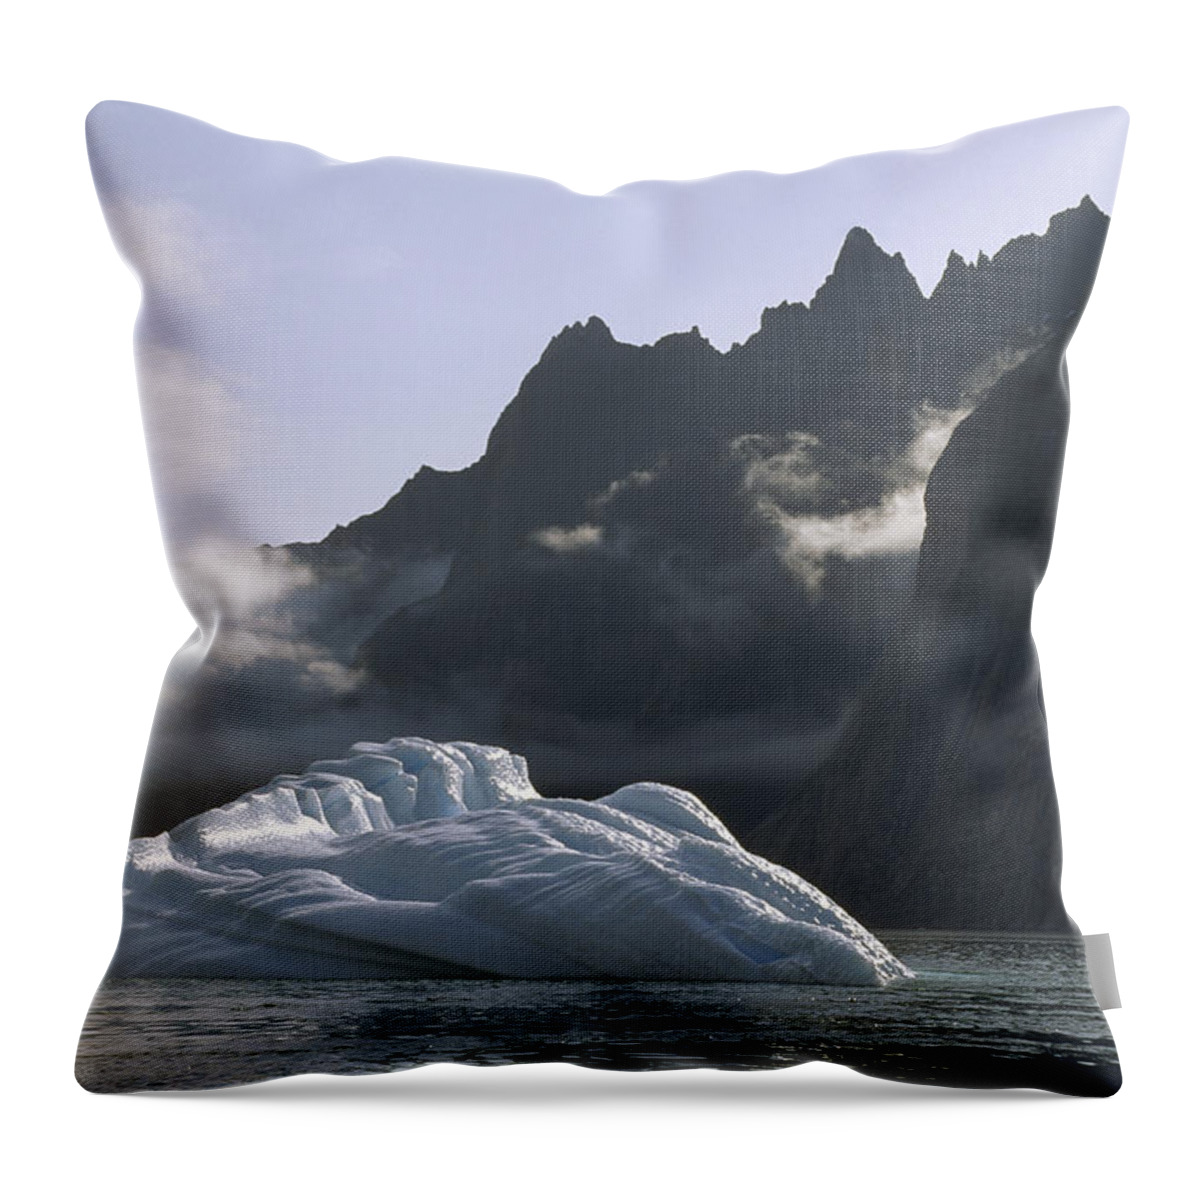 Feb0514 Throw Pillow featuring the photograph Ice Floe In Southern Greenland Fjord by Tui De Roy